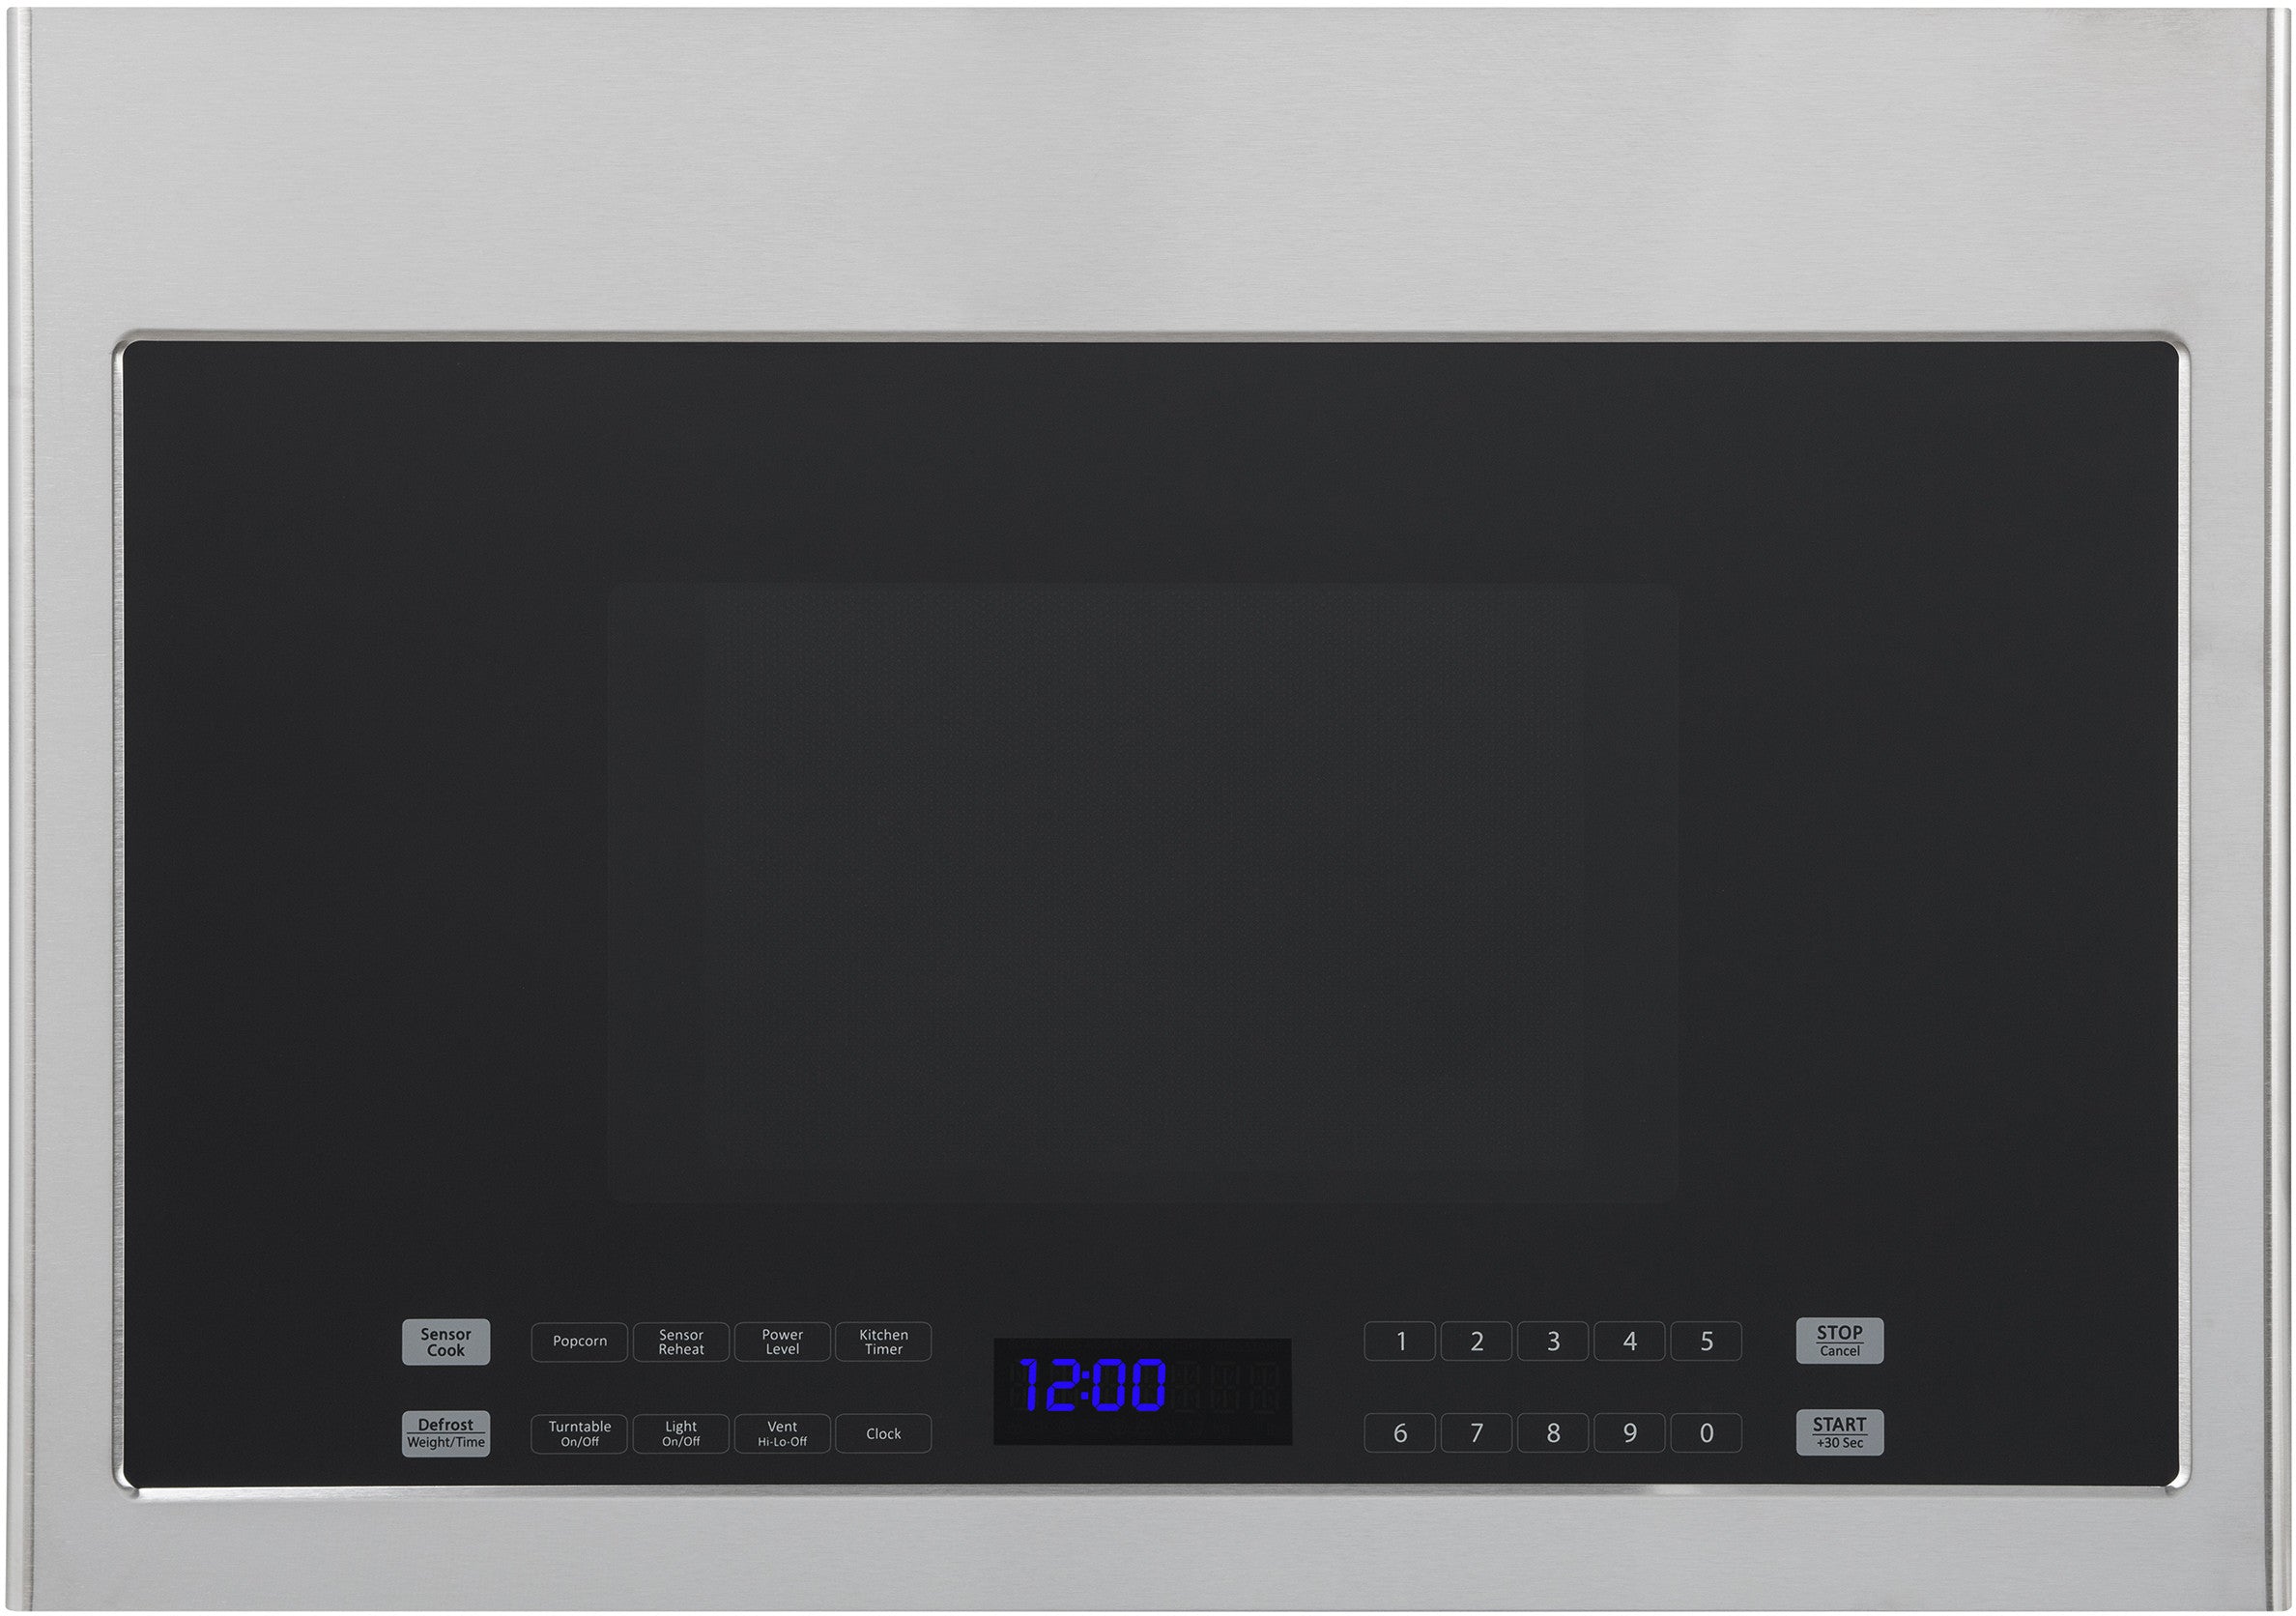 Haier - 1.4 cu. Ft  Over the range Microwave in Stainless - HMV1472BHS